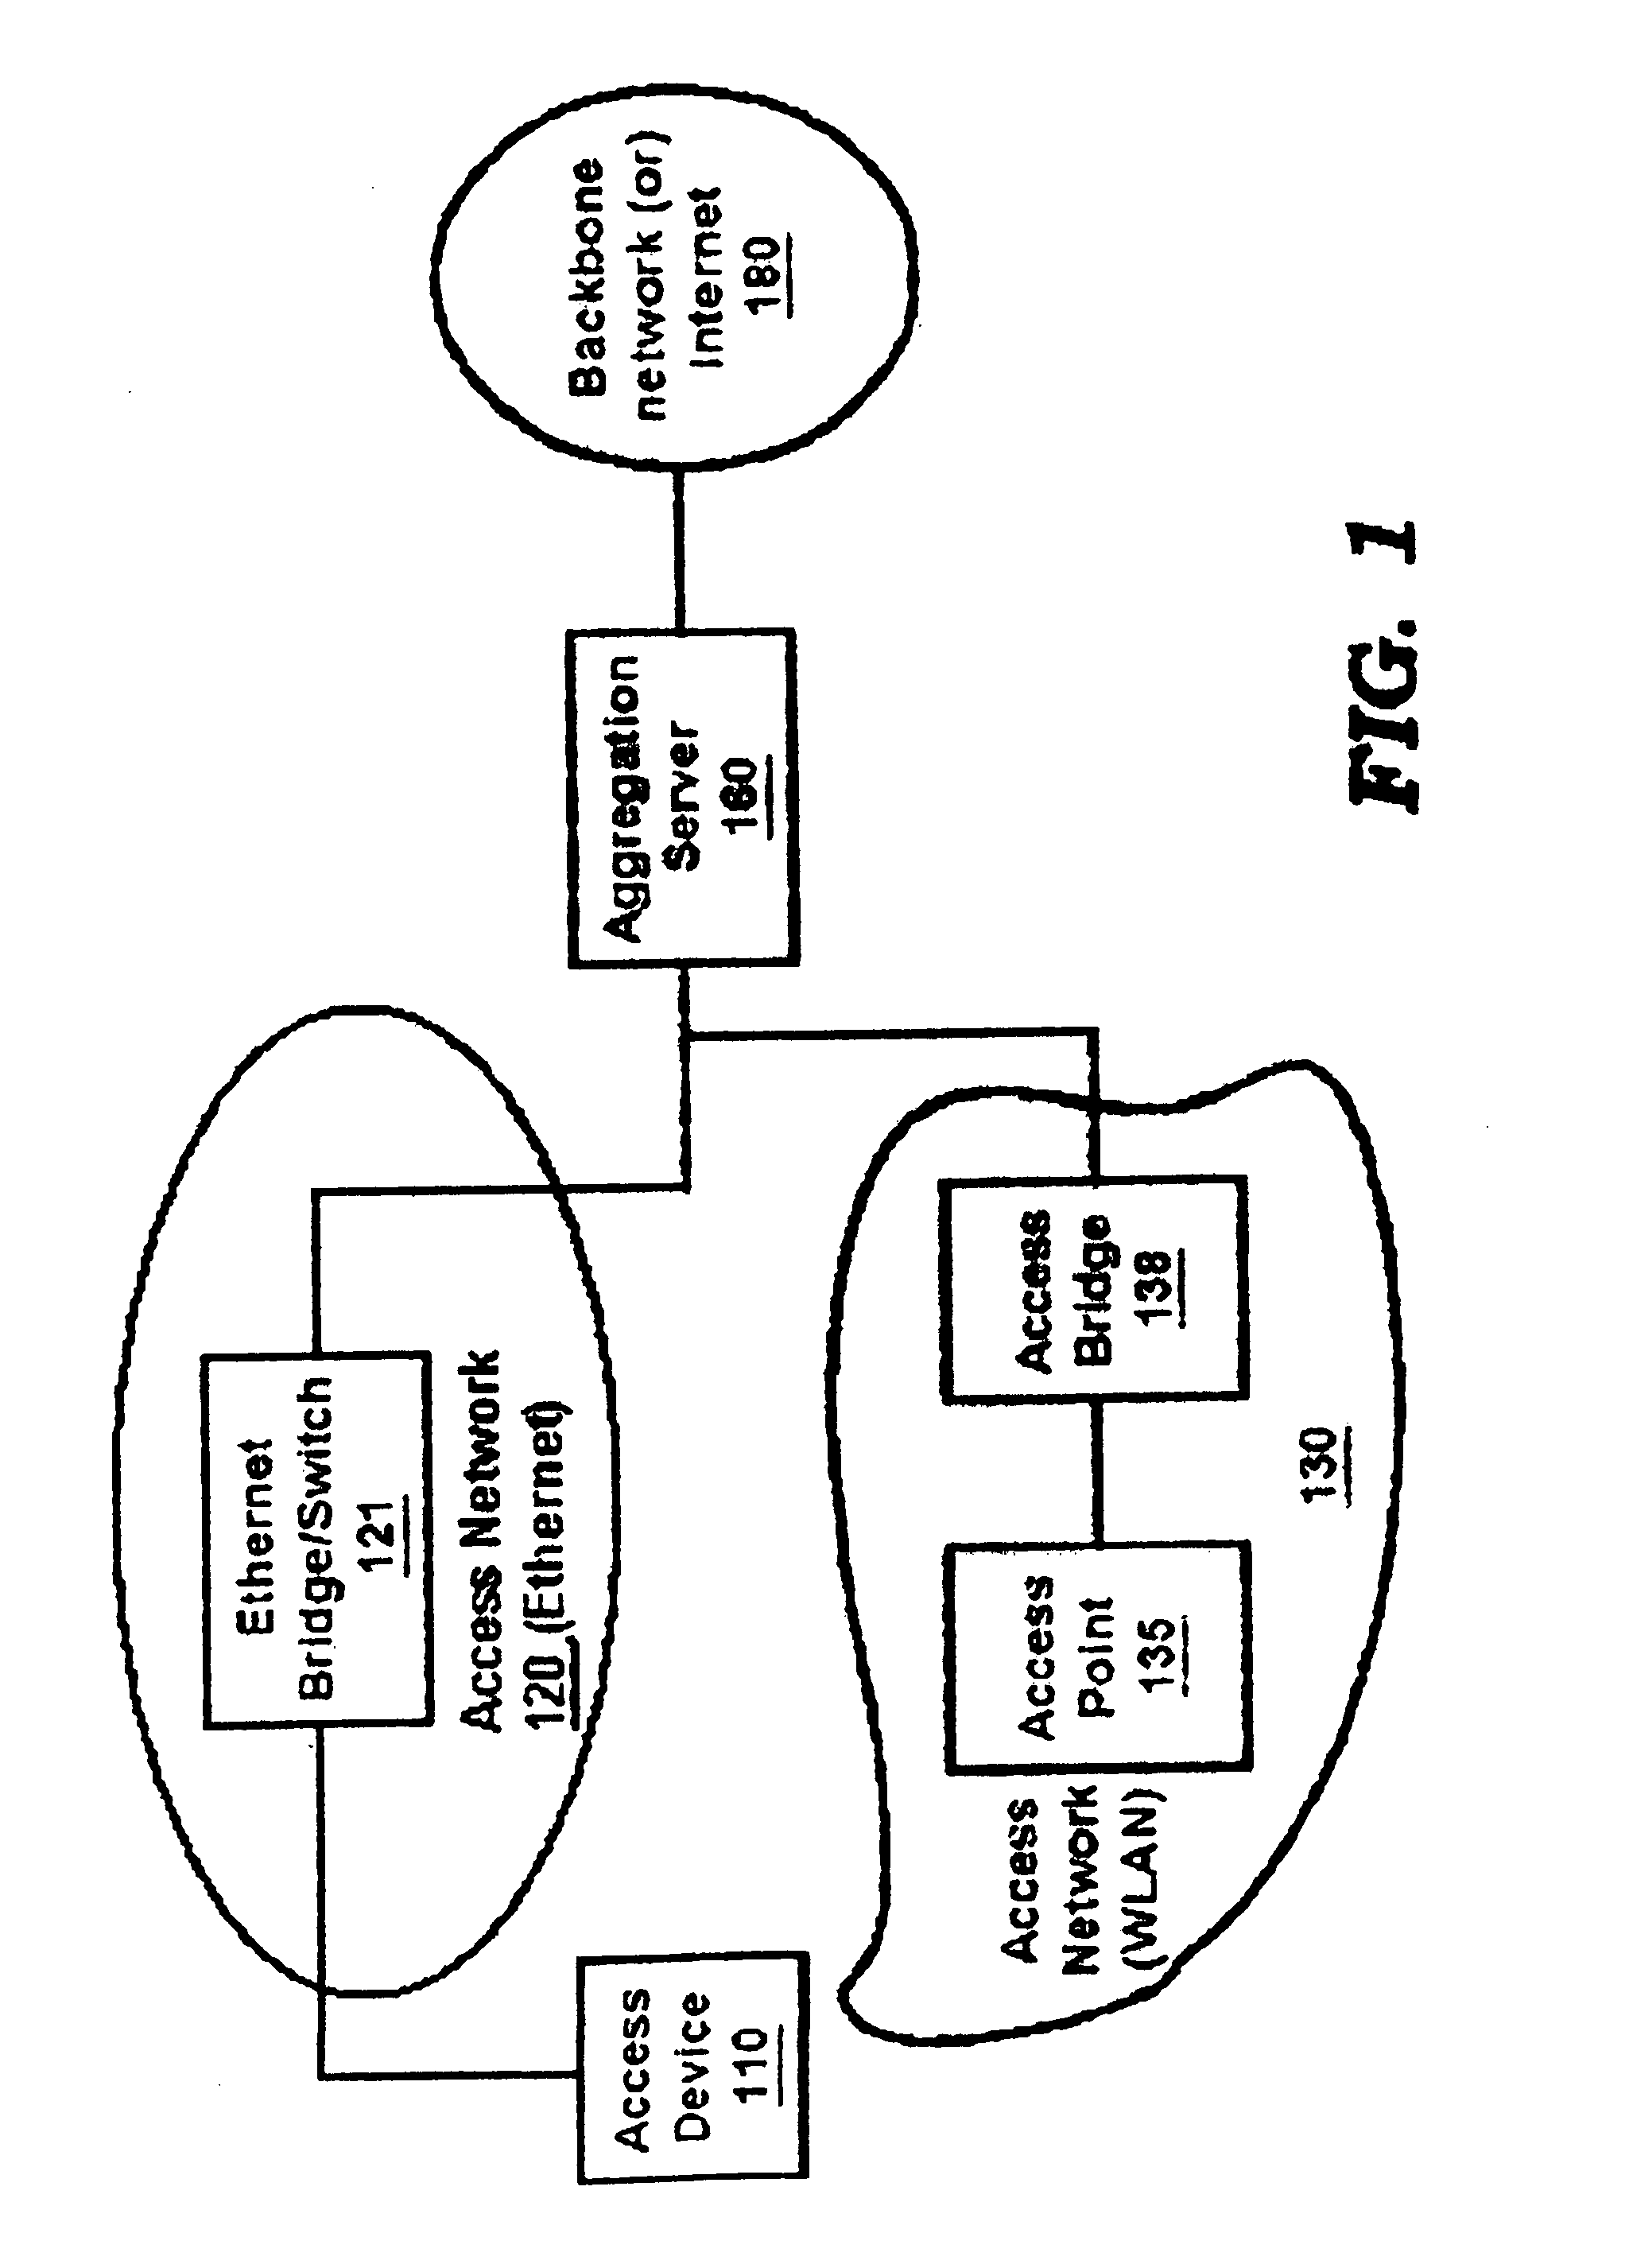 Multi-link PPP over heterogeneous single path access networks